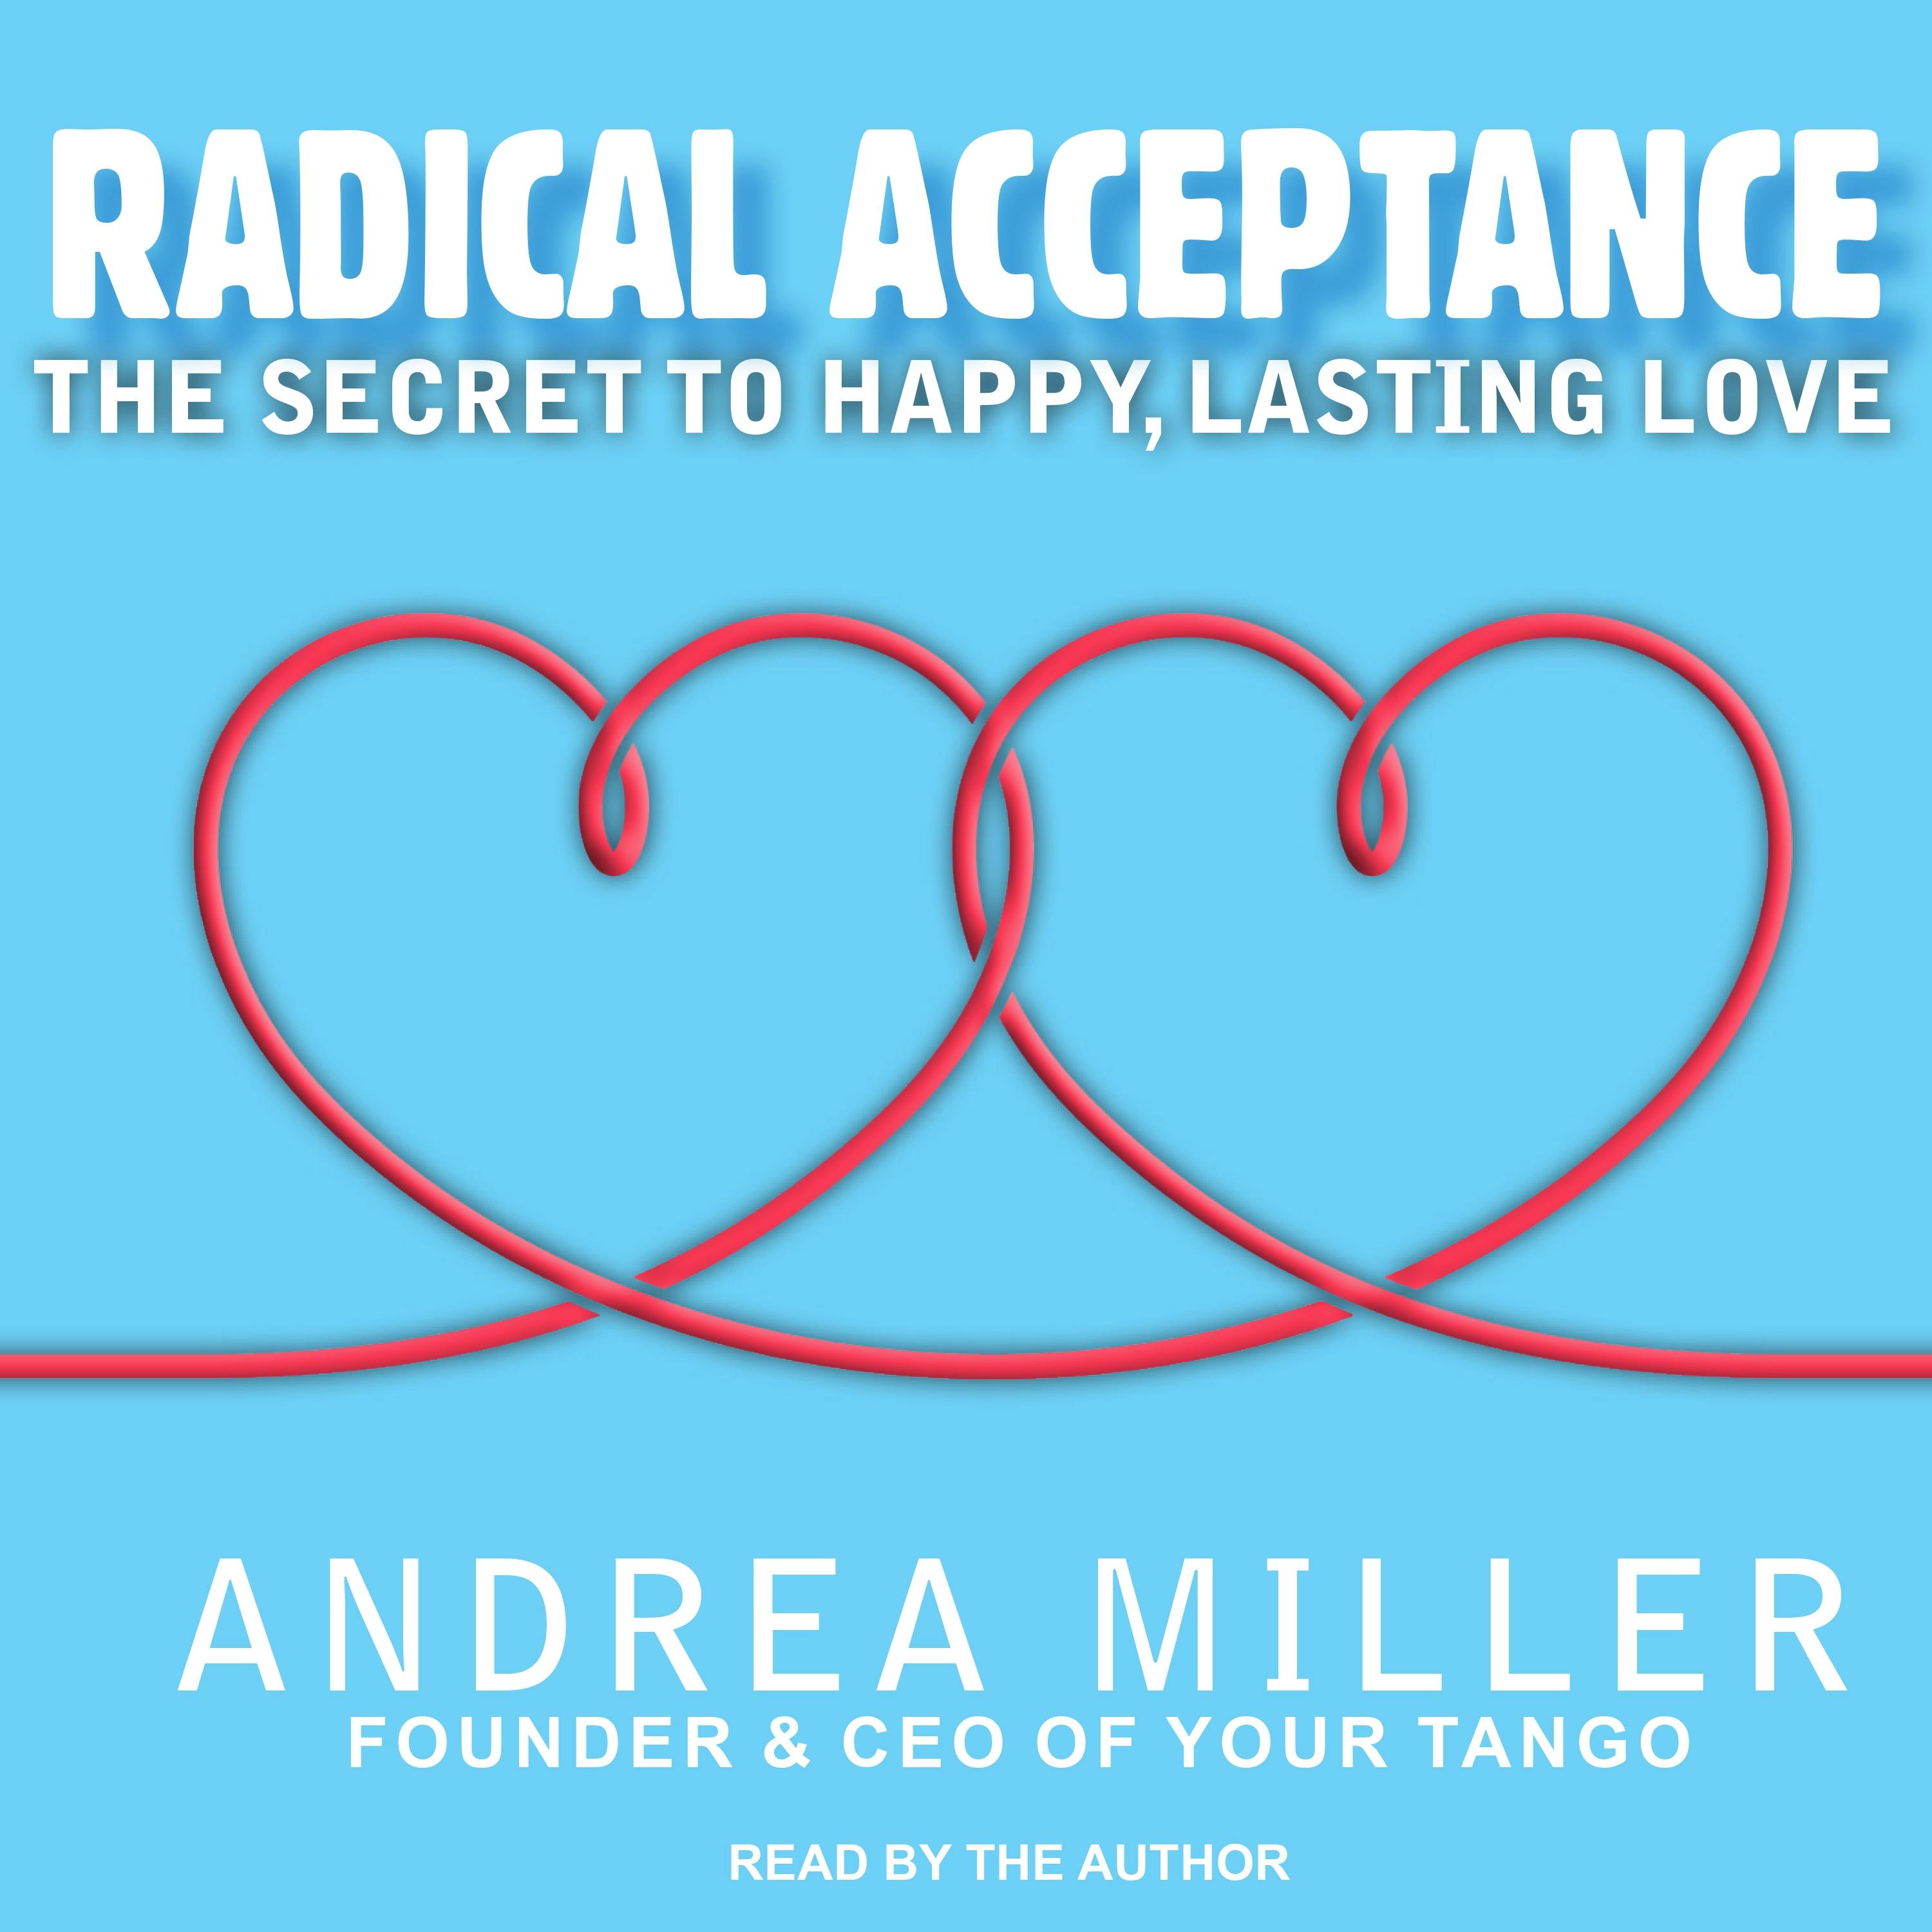 Radical Acceptance: The Secret to Happy, Lasting Love - Andrea Miller